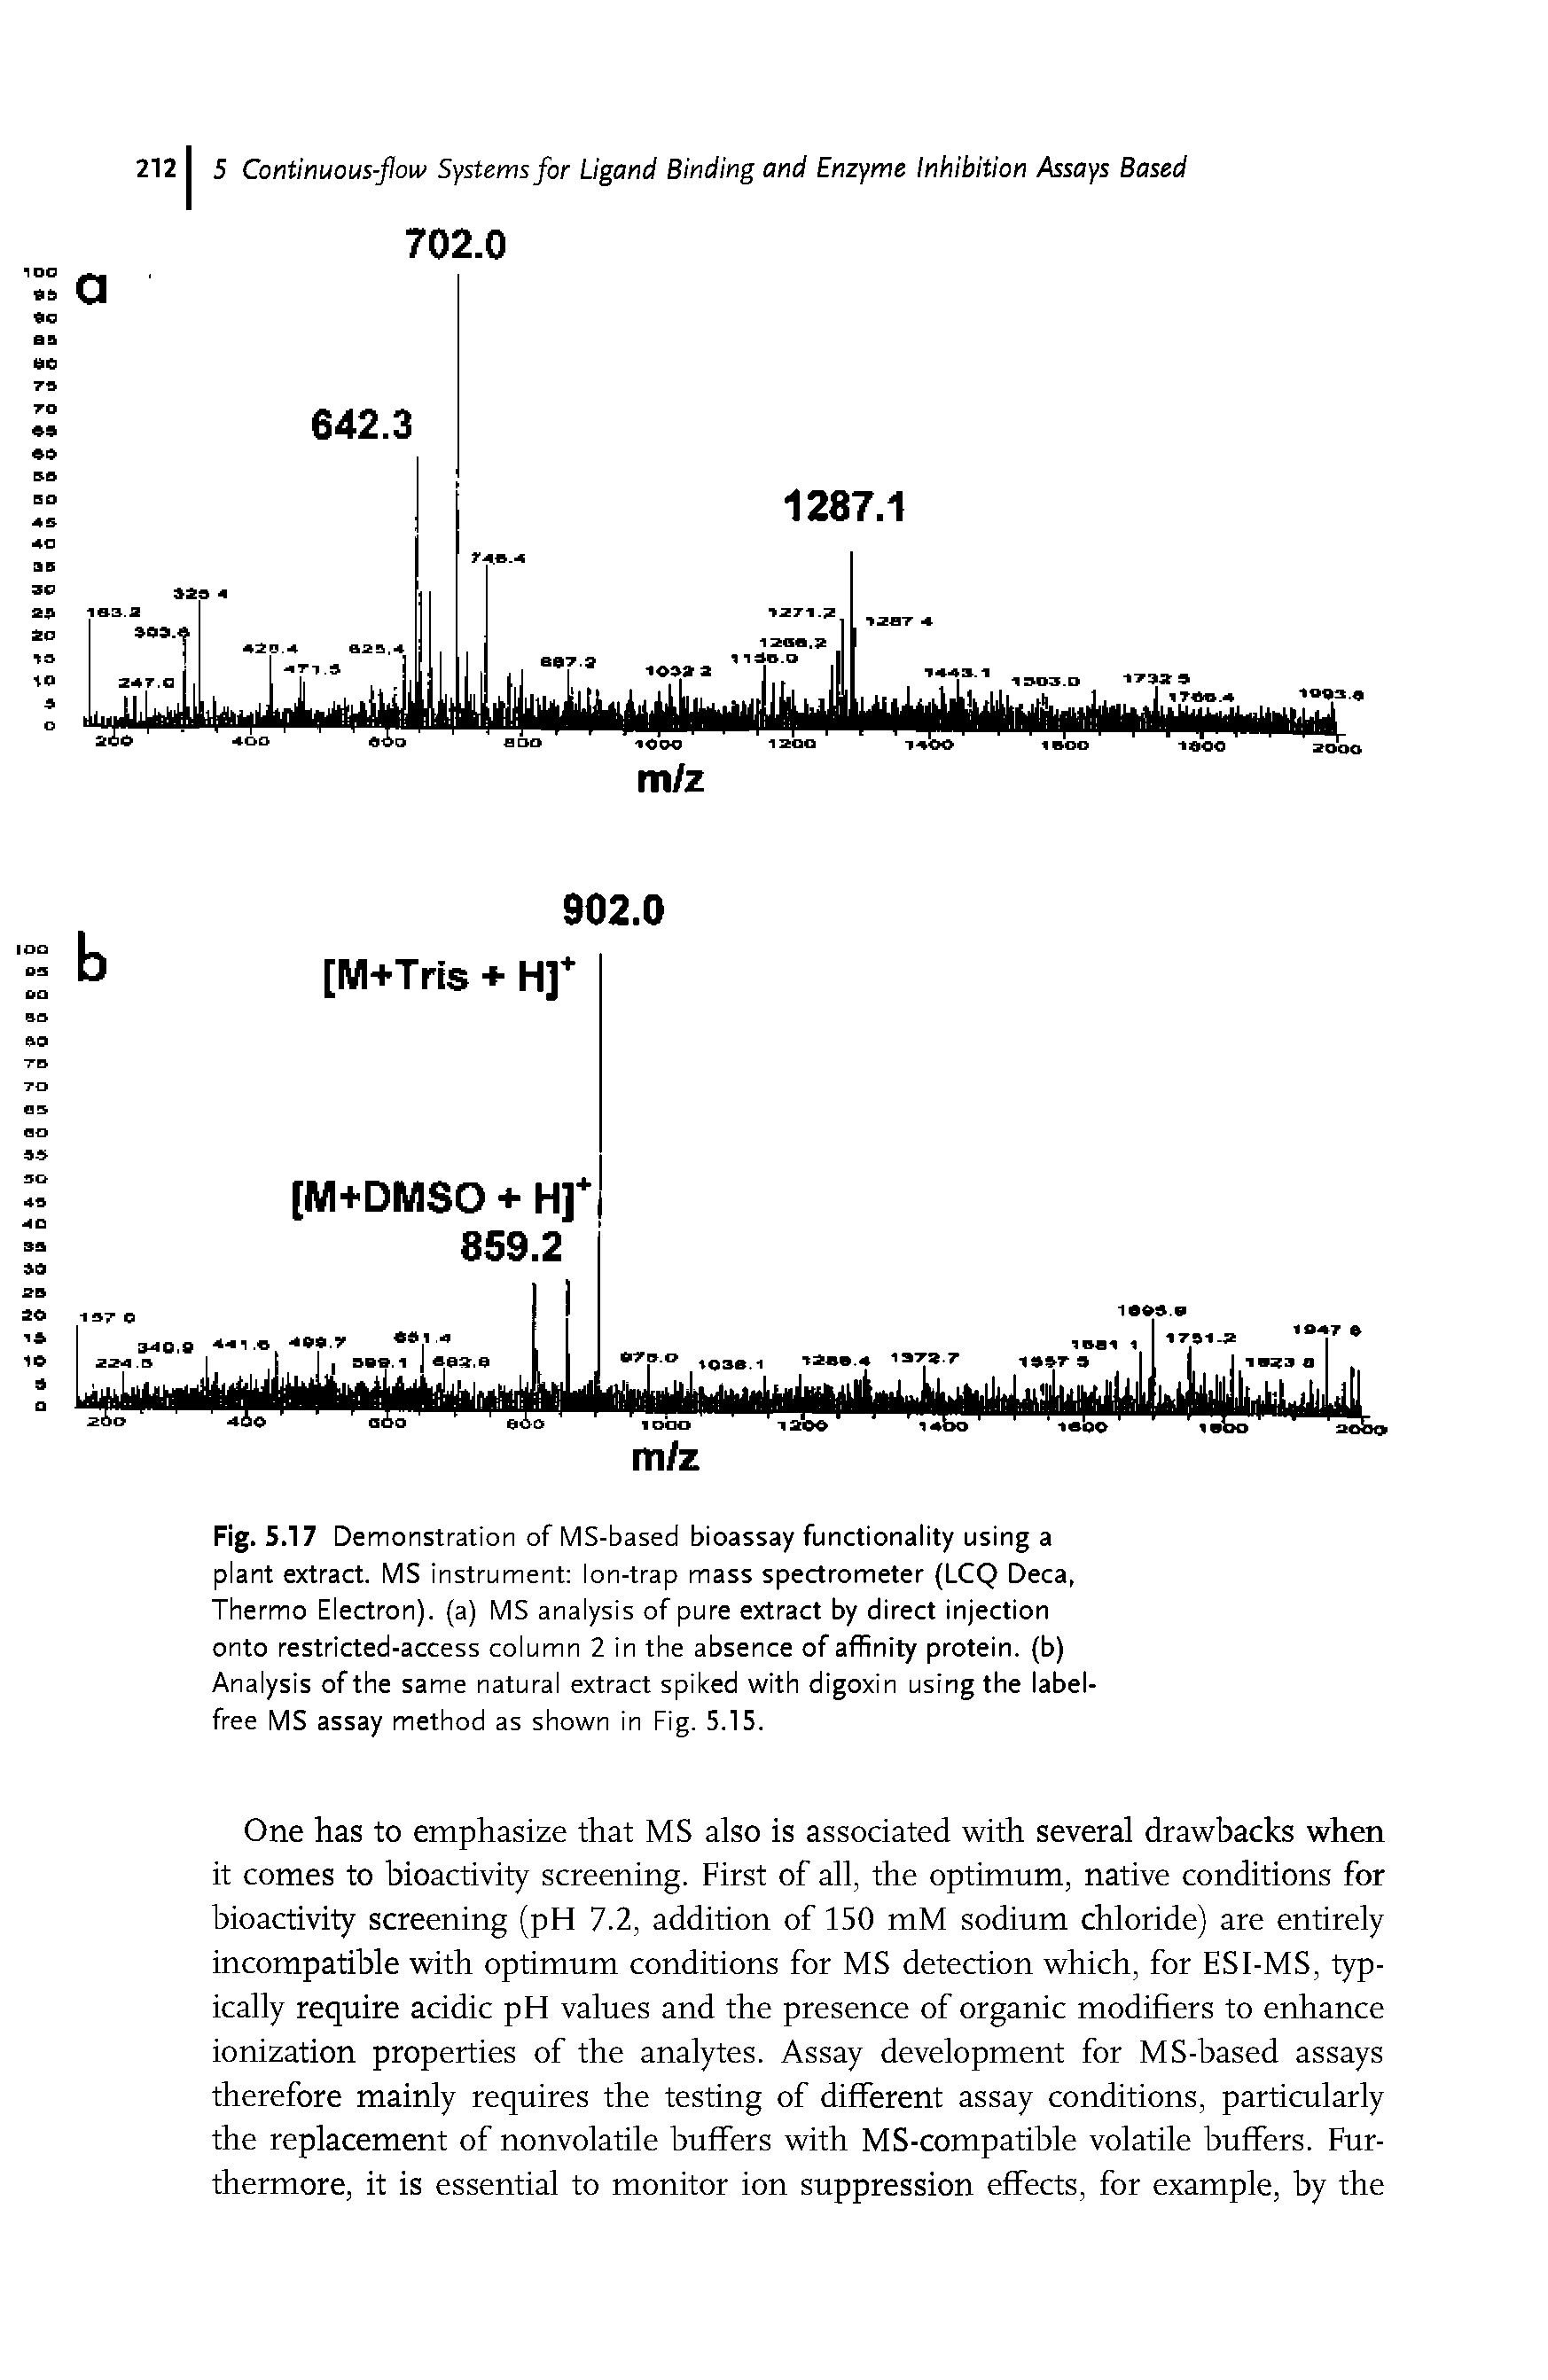 Fig. 5.17 Demonstration of MS-based bioassay functionality using a plant extract. MS instrument Ion-trap mass spectrometer (LCQ Deca, Thermo Electron), (a) MS analysis of pure extract by direct injection onto restricted-access column 2 in the absence of affinity protein, (b) Analysis of the same natural extract spiked with digoxin using the label-free MS assay method as shown in Fig. 5.15.